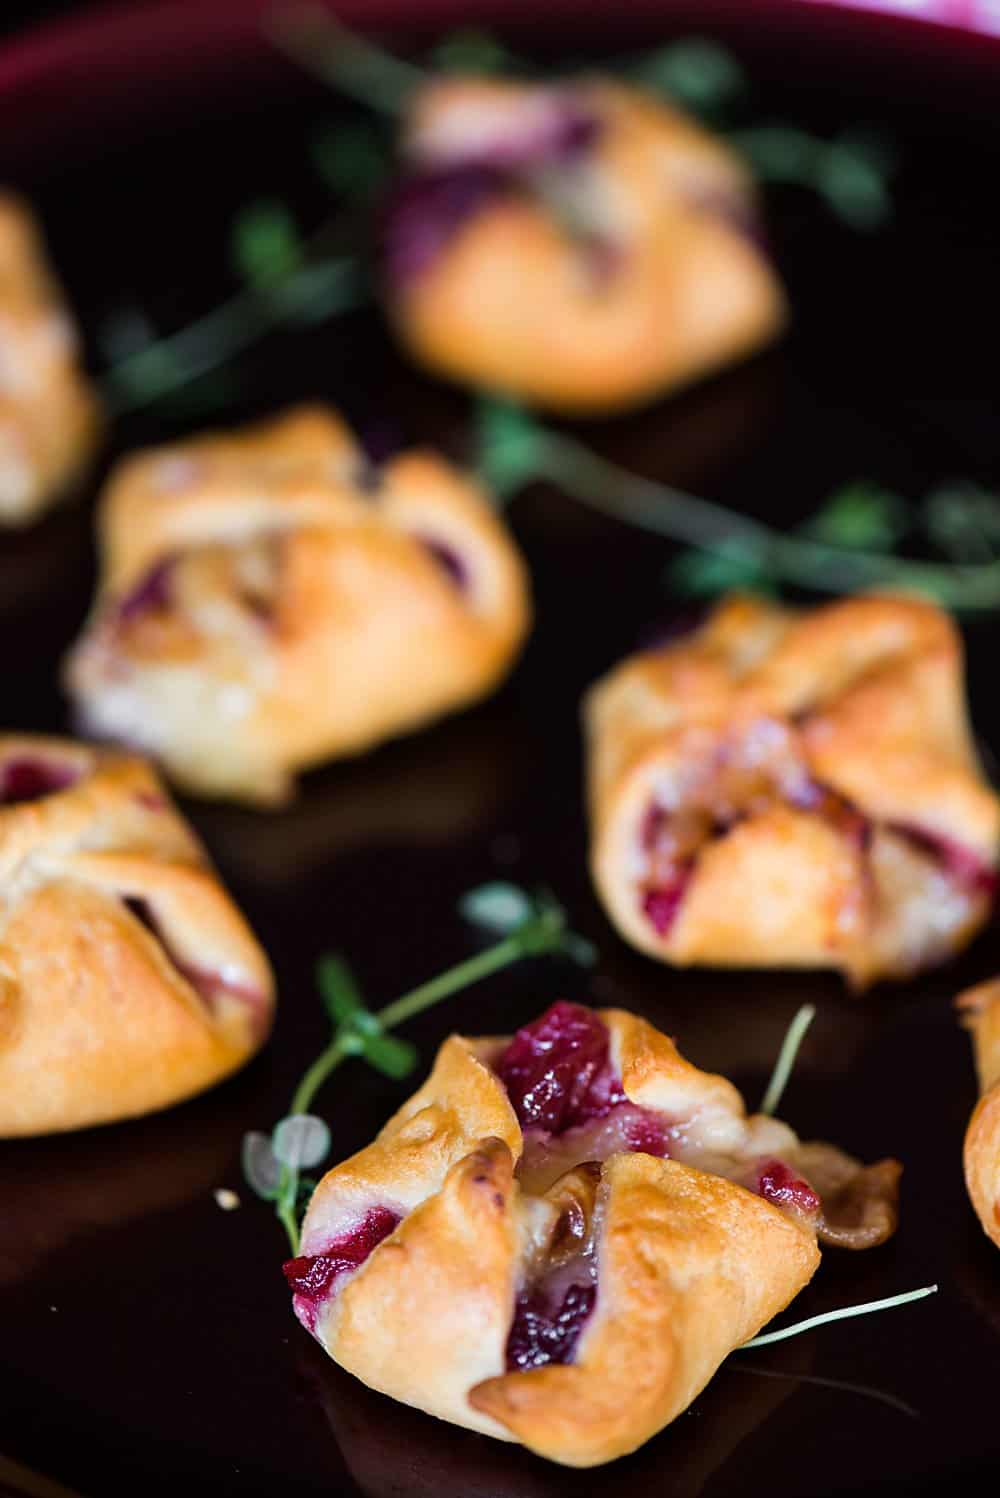 Cranberry Brie Bites are an easy three ingredient appetizer that are perfect for holiday parties. Warm and delicious - everyone will love them!